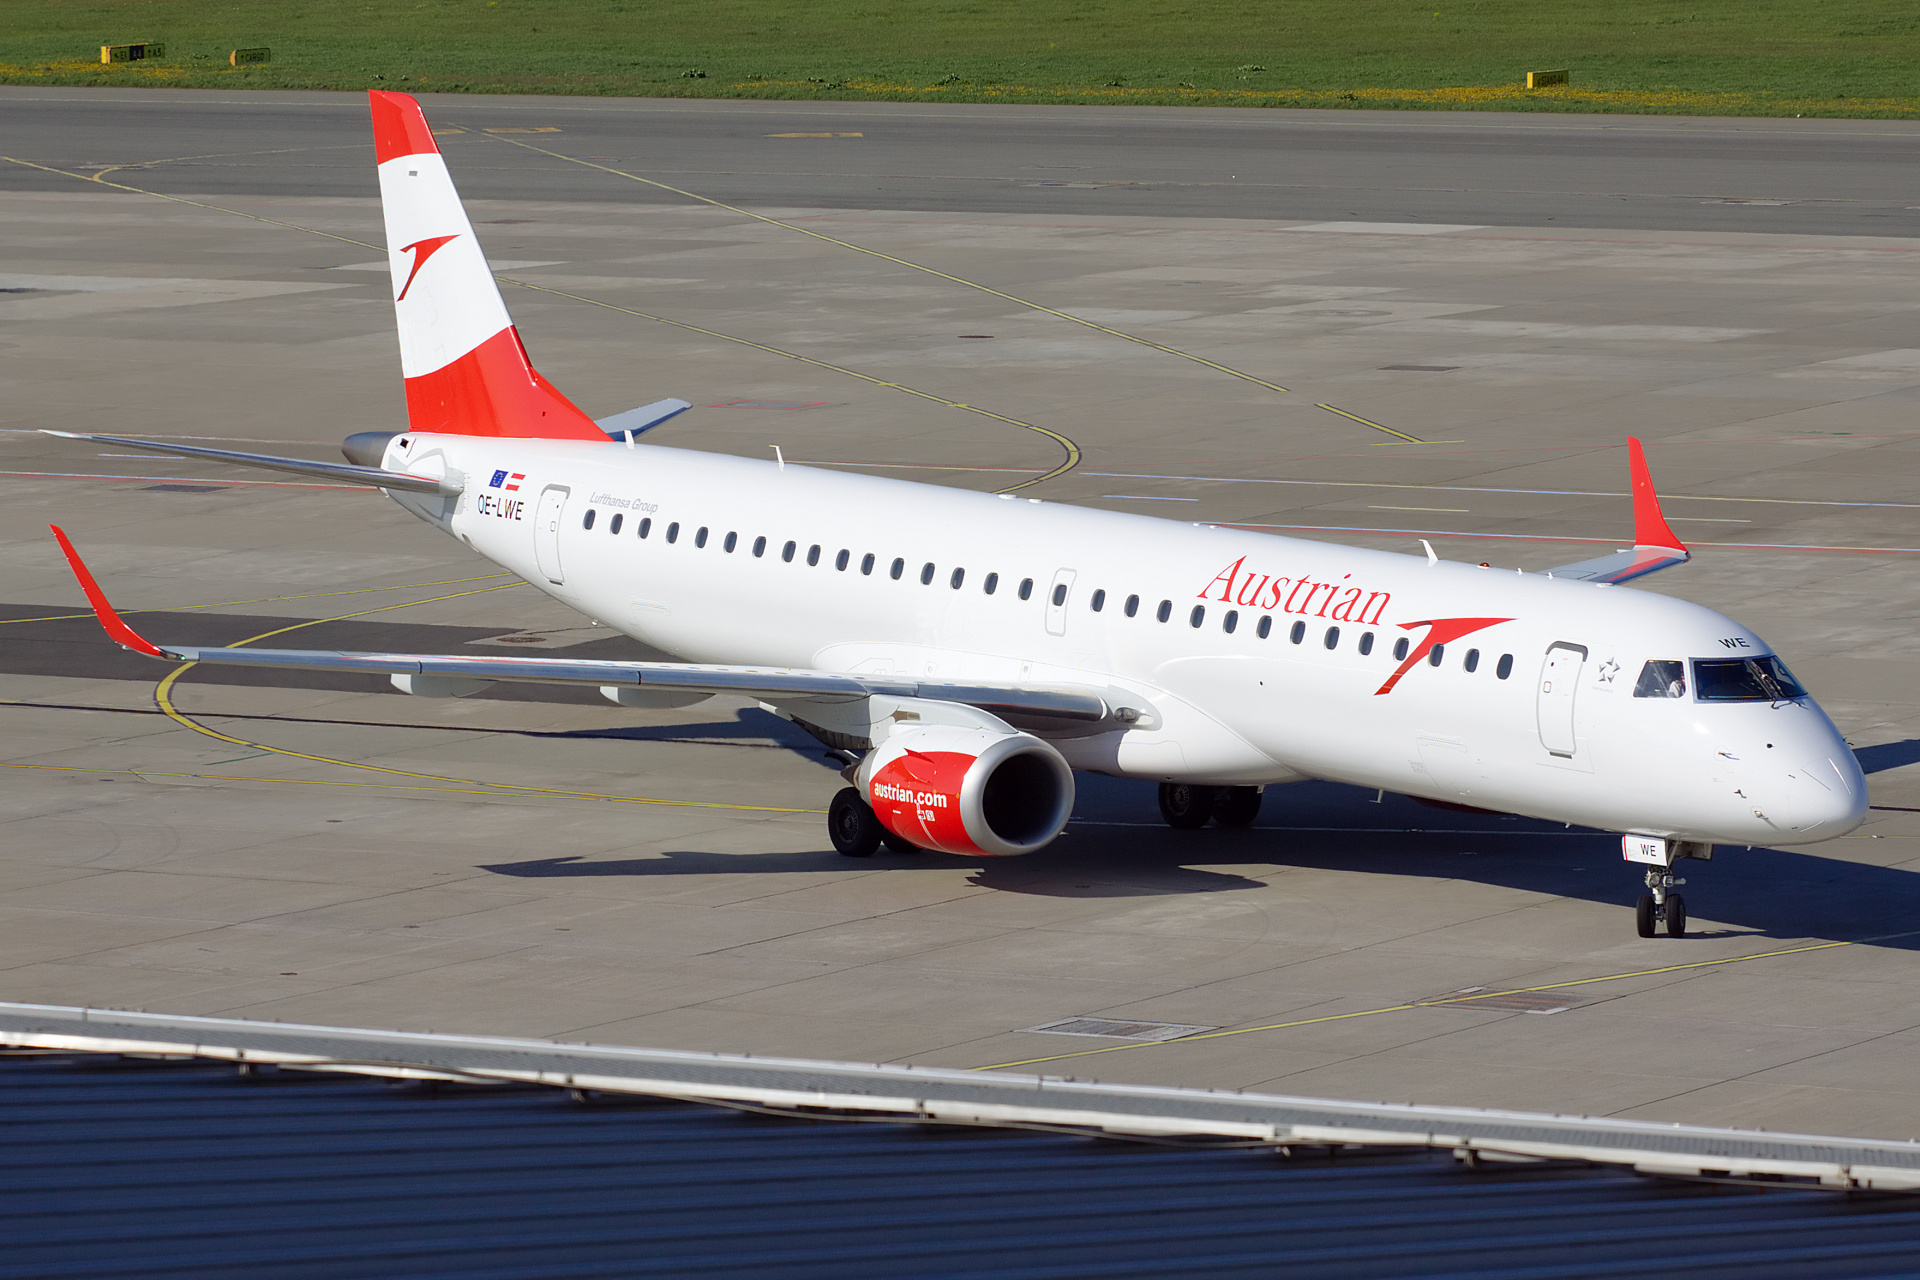 OE-LWE (Aircraft » EPWA Spotting » Embraer E195 » Austrian Airlines)